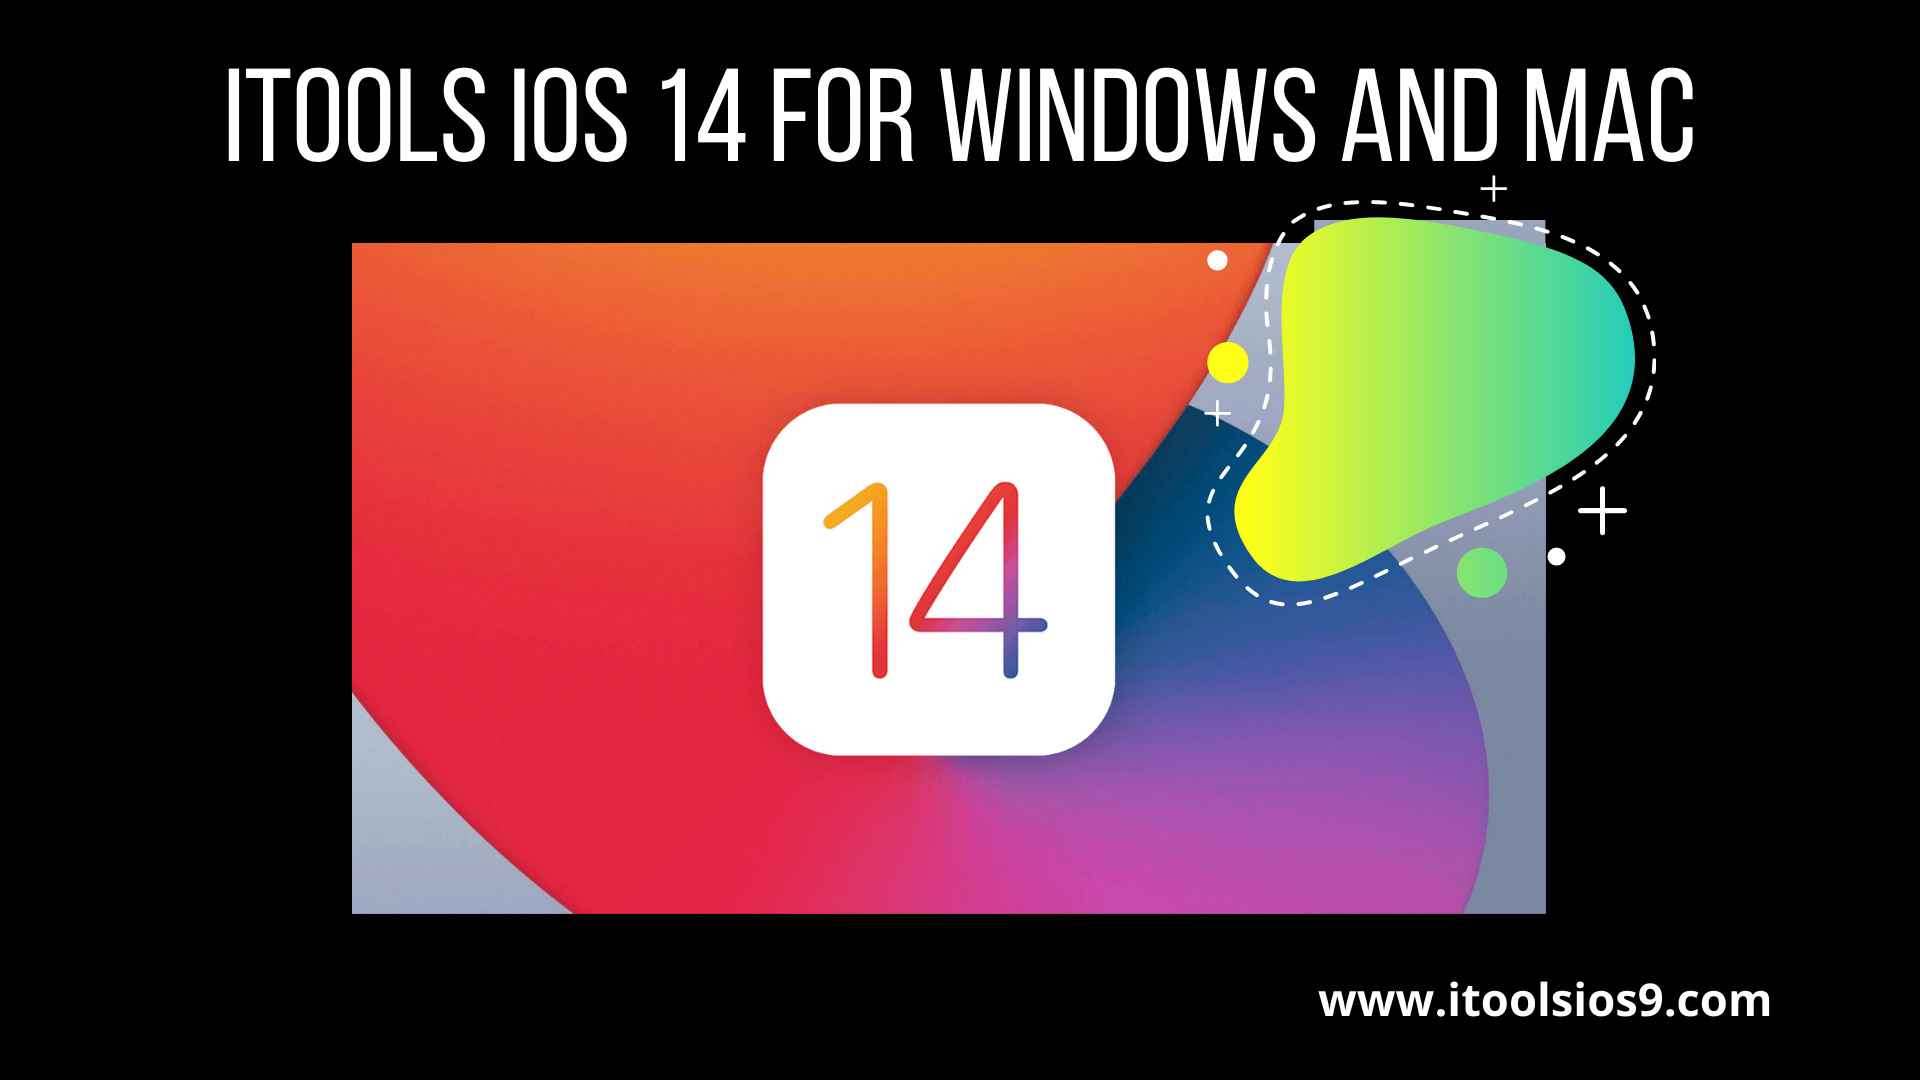 apple itools free download for windows 8